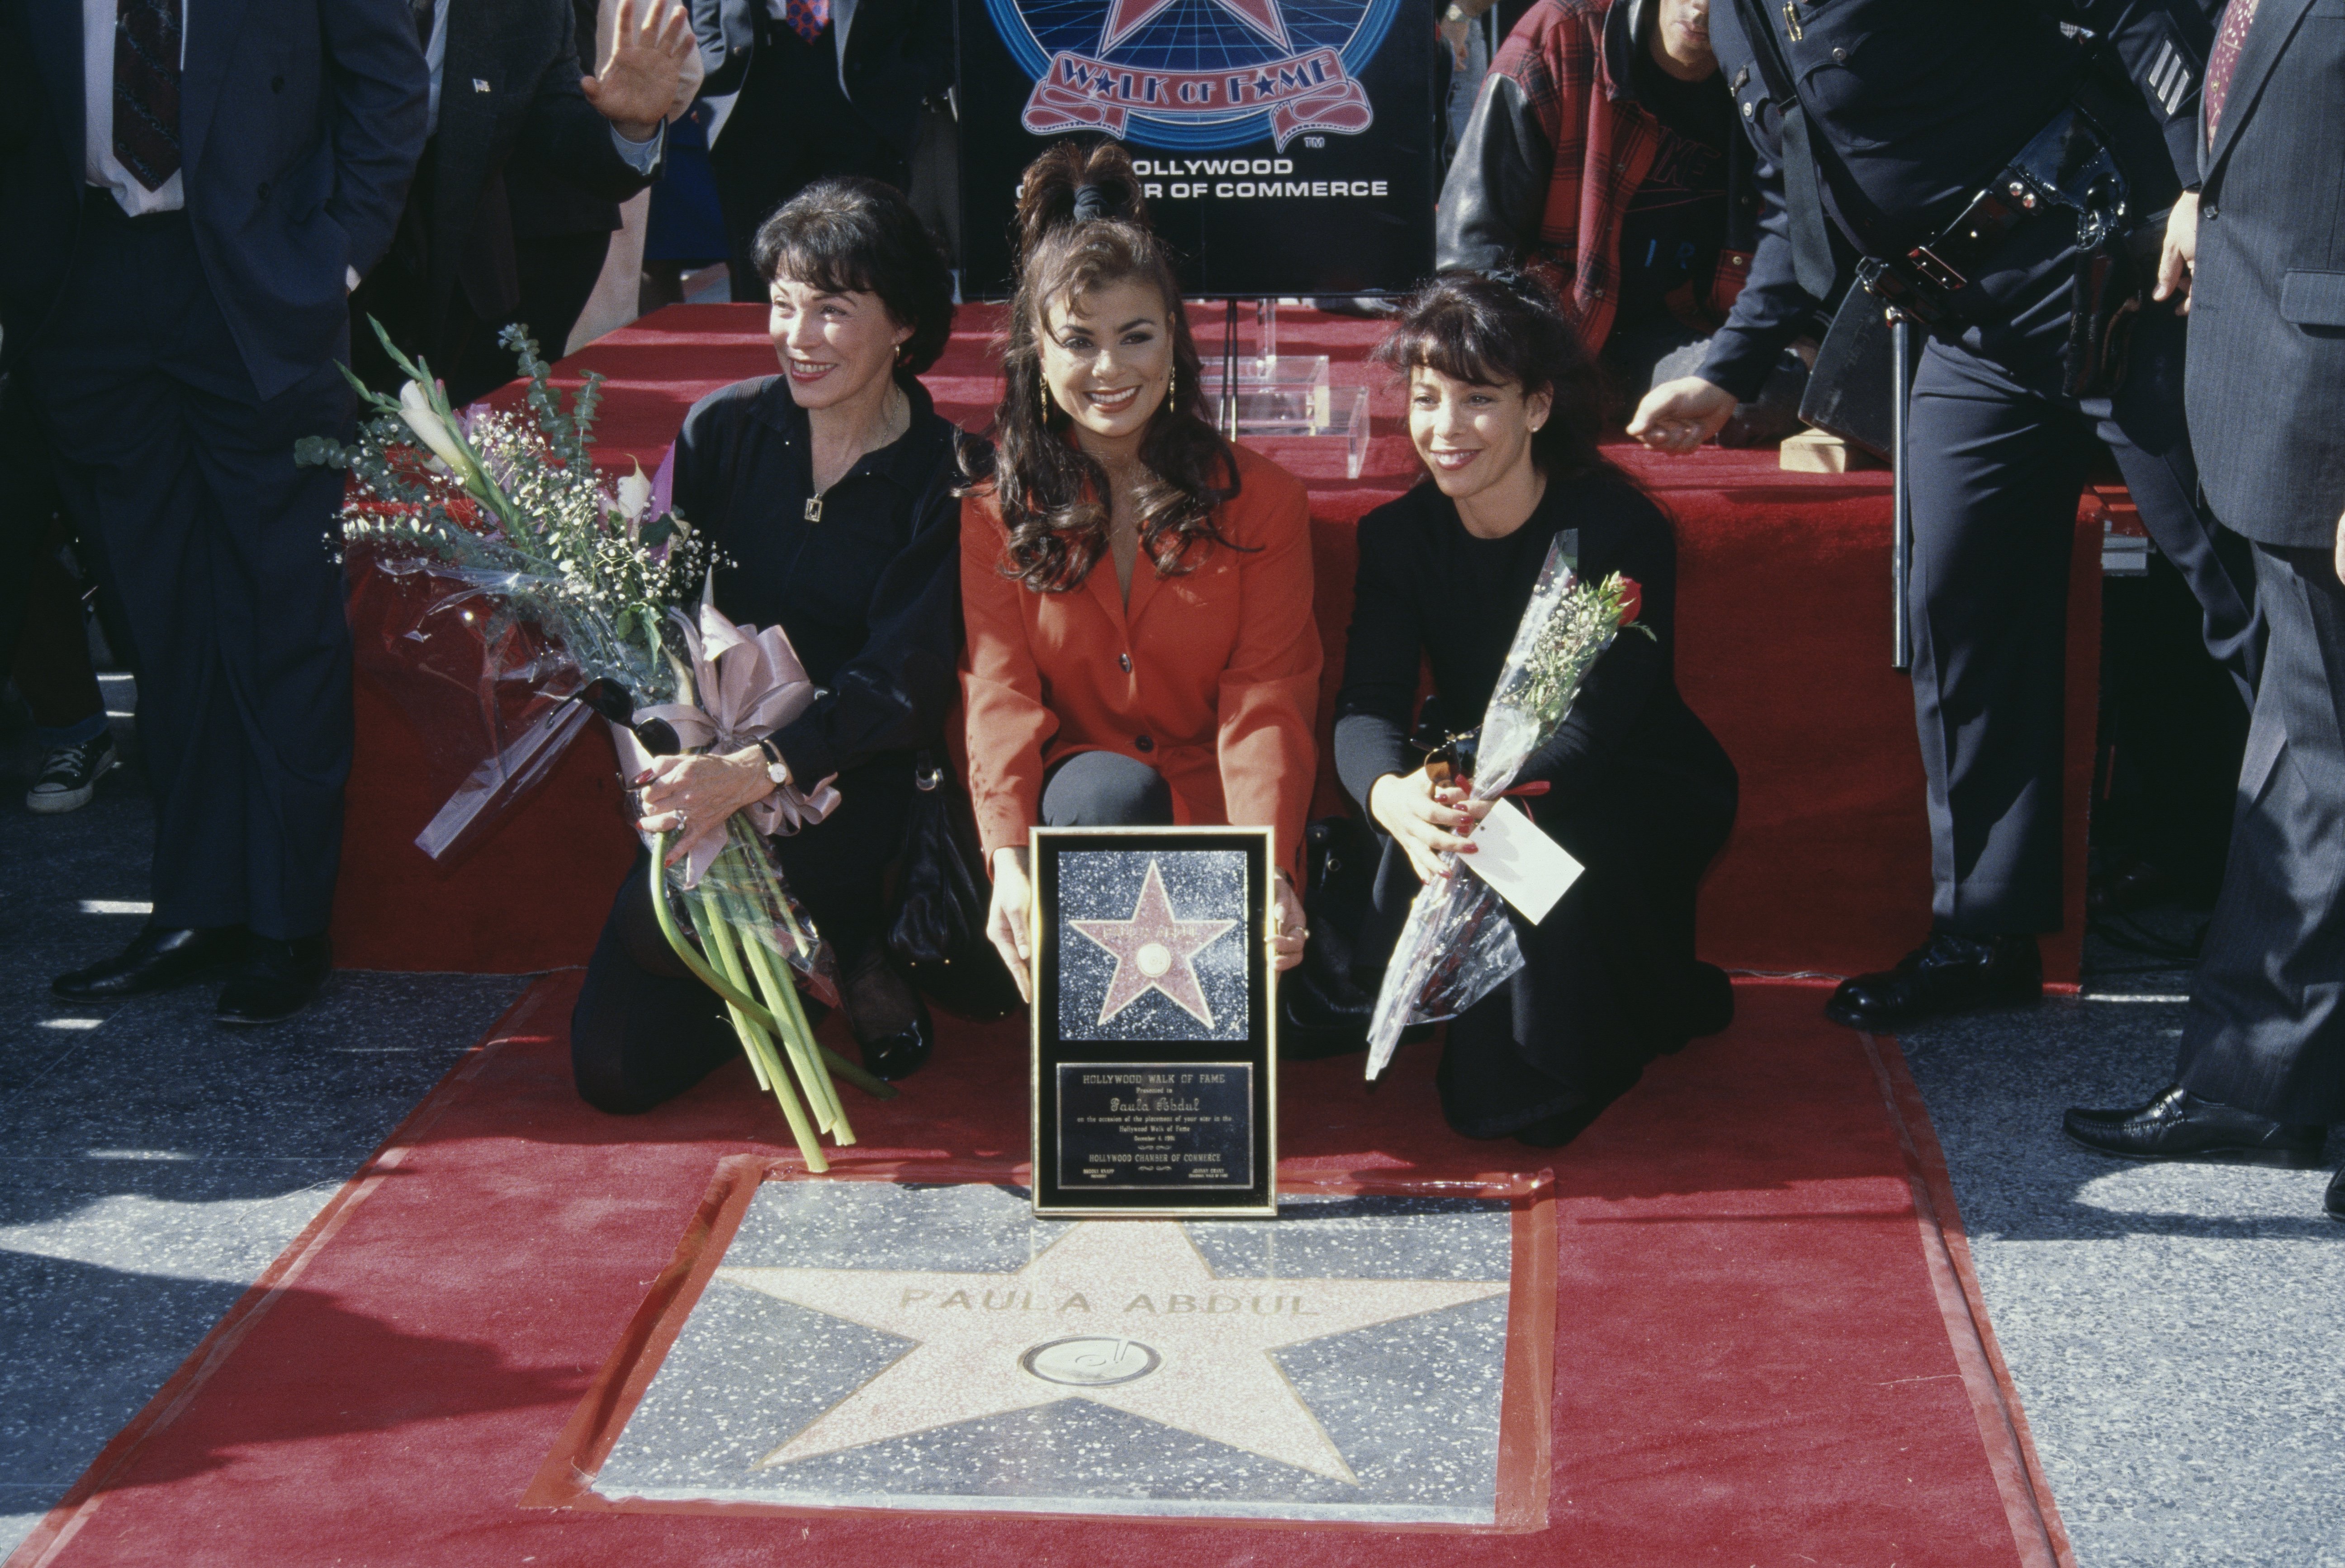 American singer and dancer Paula Abdul (centre), with her mother, Canadian pianist Lorraine Rykiss, and sister, Wendy Mandel, during Abdul's Hollywood Walk of Fame Star Ceremony, held at 7021 Hollywood Boulevard, in Los Angeles, California, in December 4, 1991. | Source: Getty Images